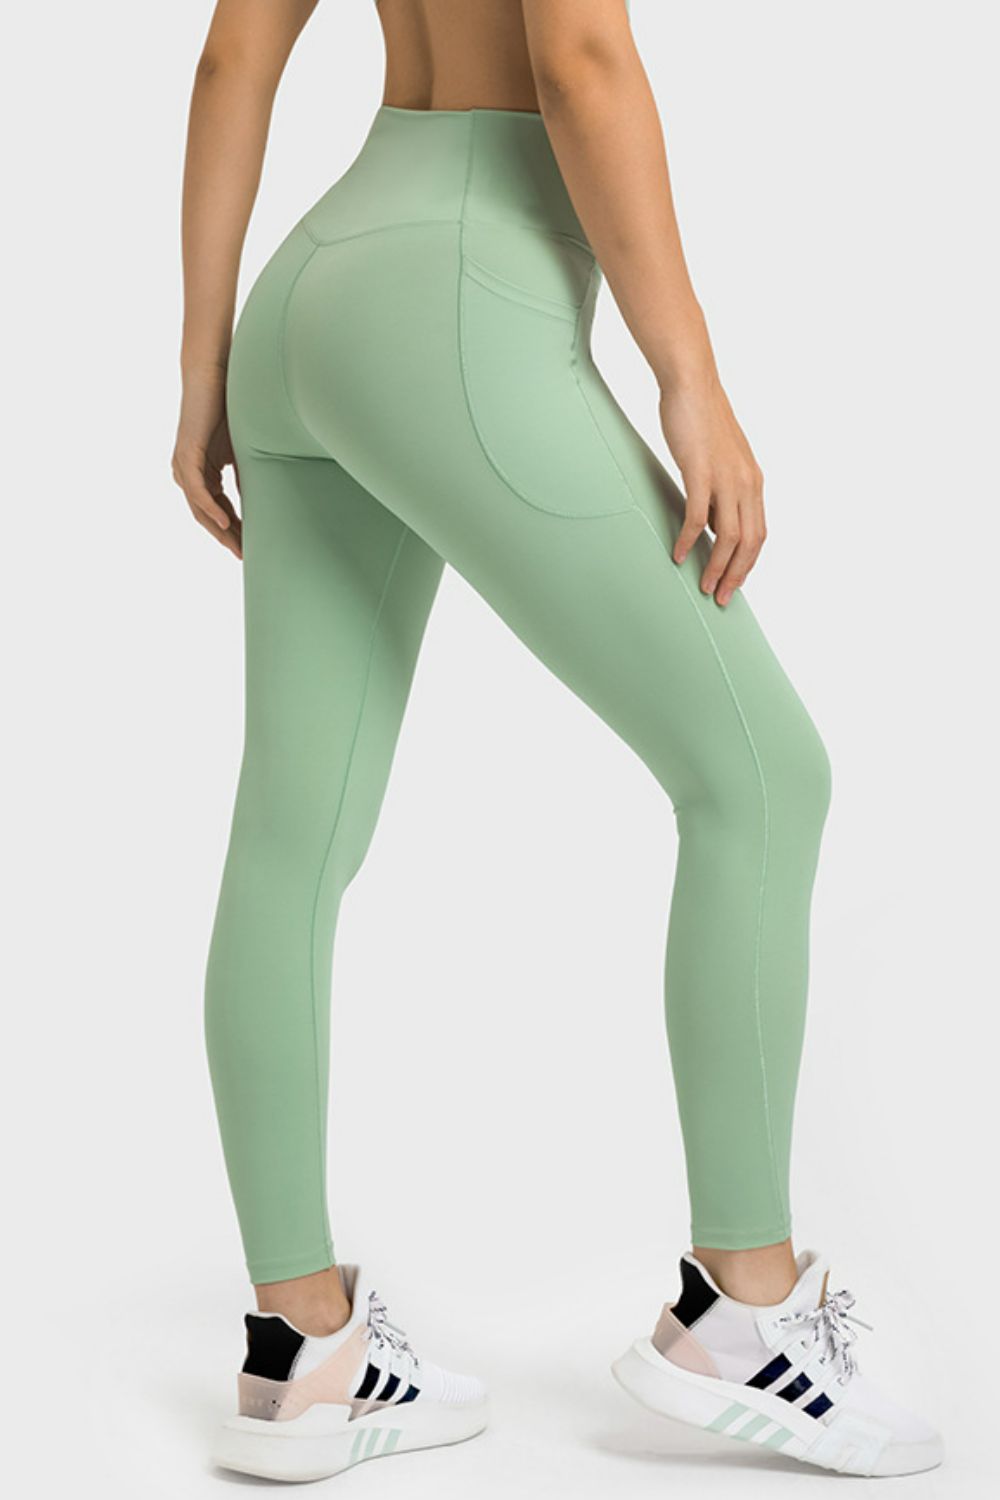 Zenana On Your Mark Full Size High Waisted Active Leggings in Deep